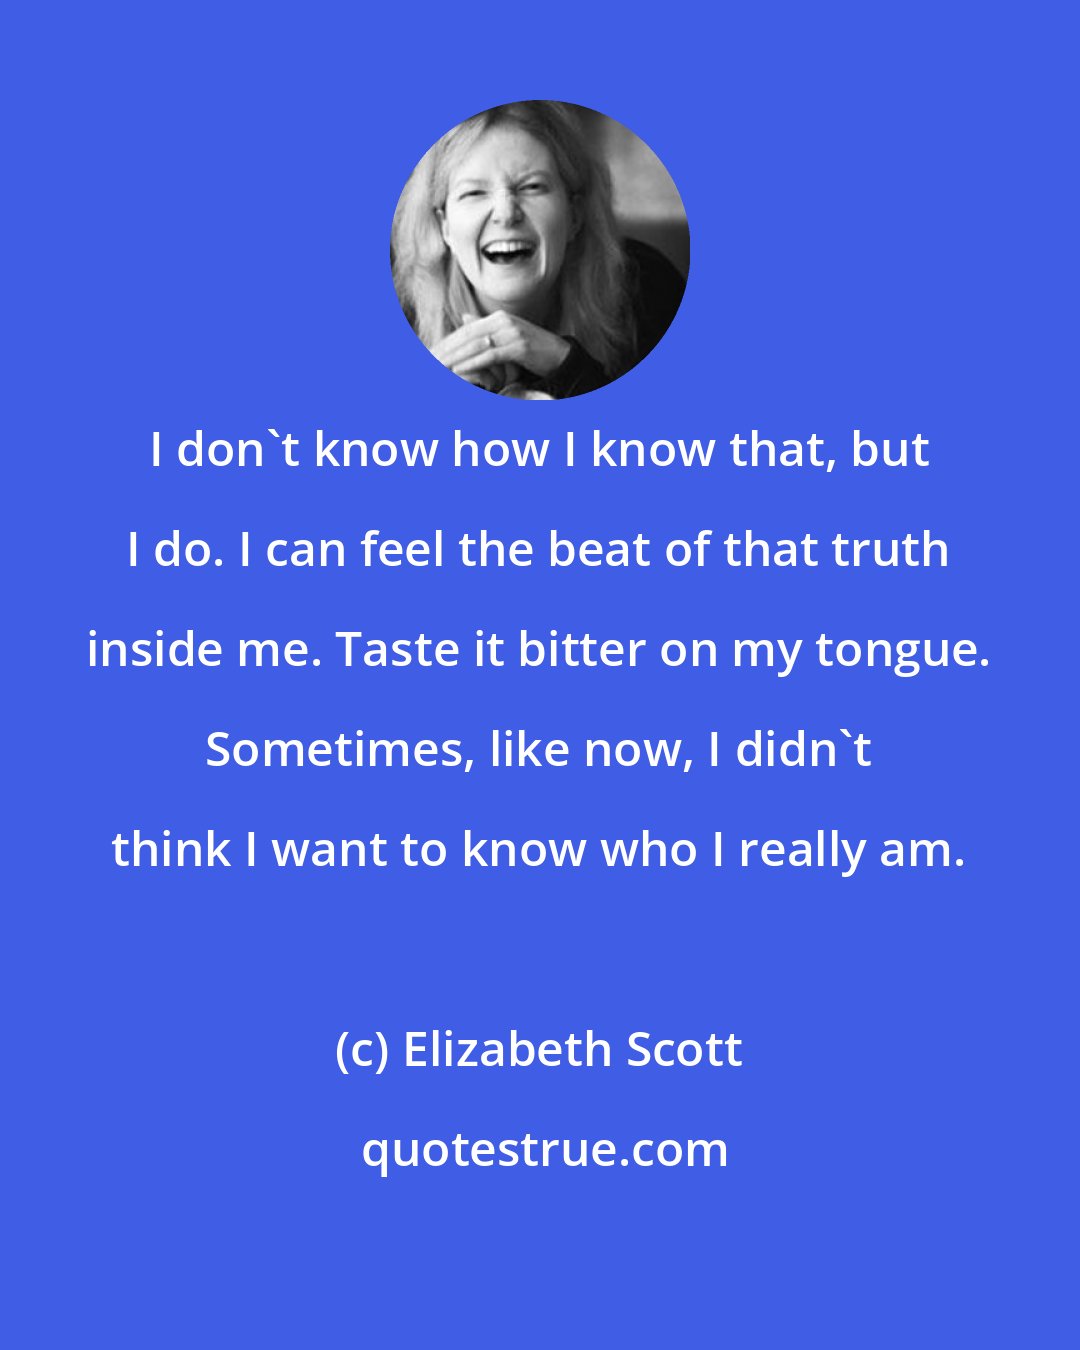 Elizabeth Scott: I don't know how I know that, but I do. I can feel the beat of that truth inside me. Taste it bitter on my tongue. Sometimes, like now, I didn't think I want to know who I really am.